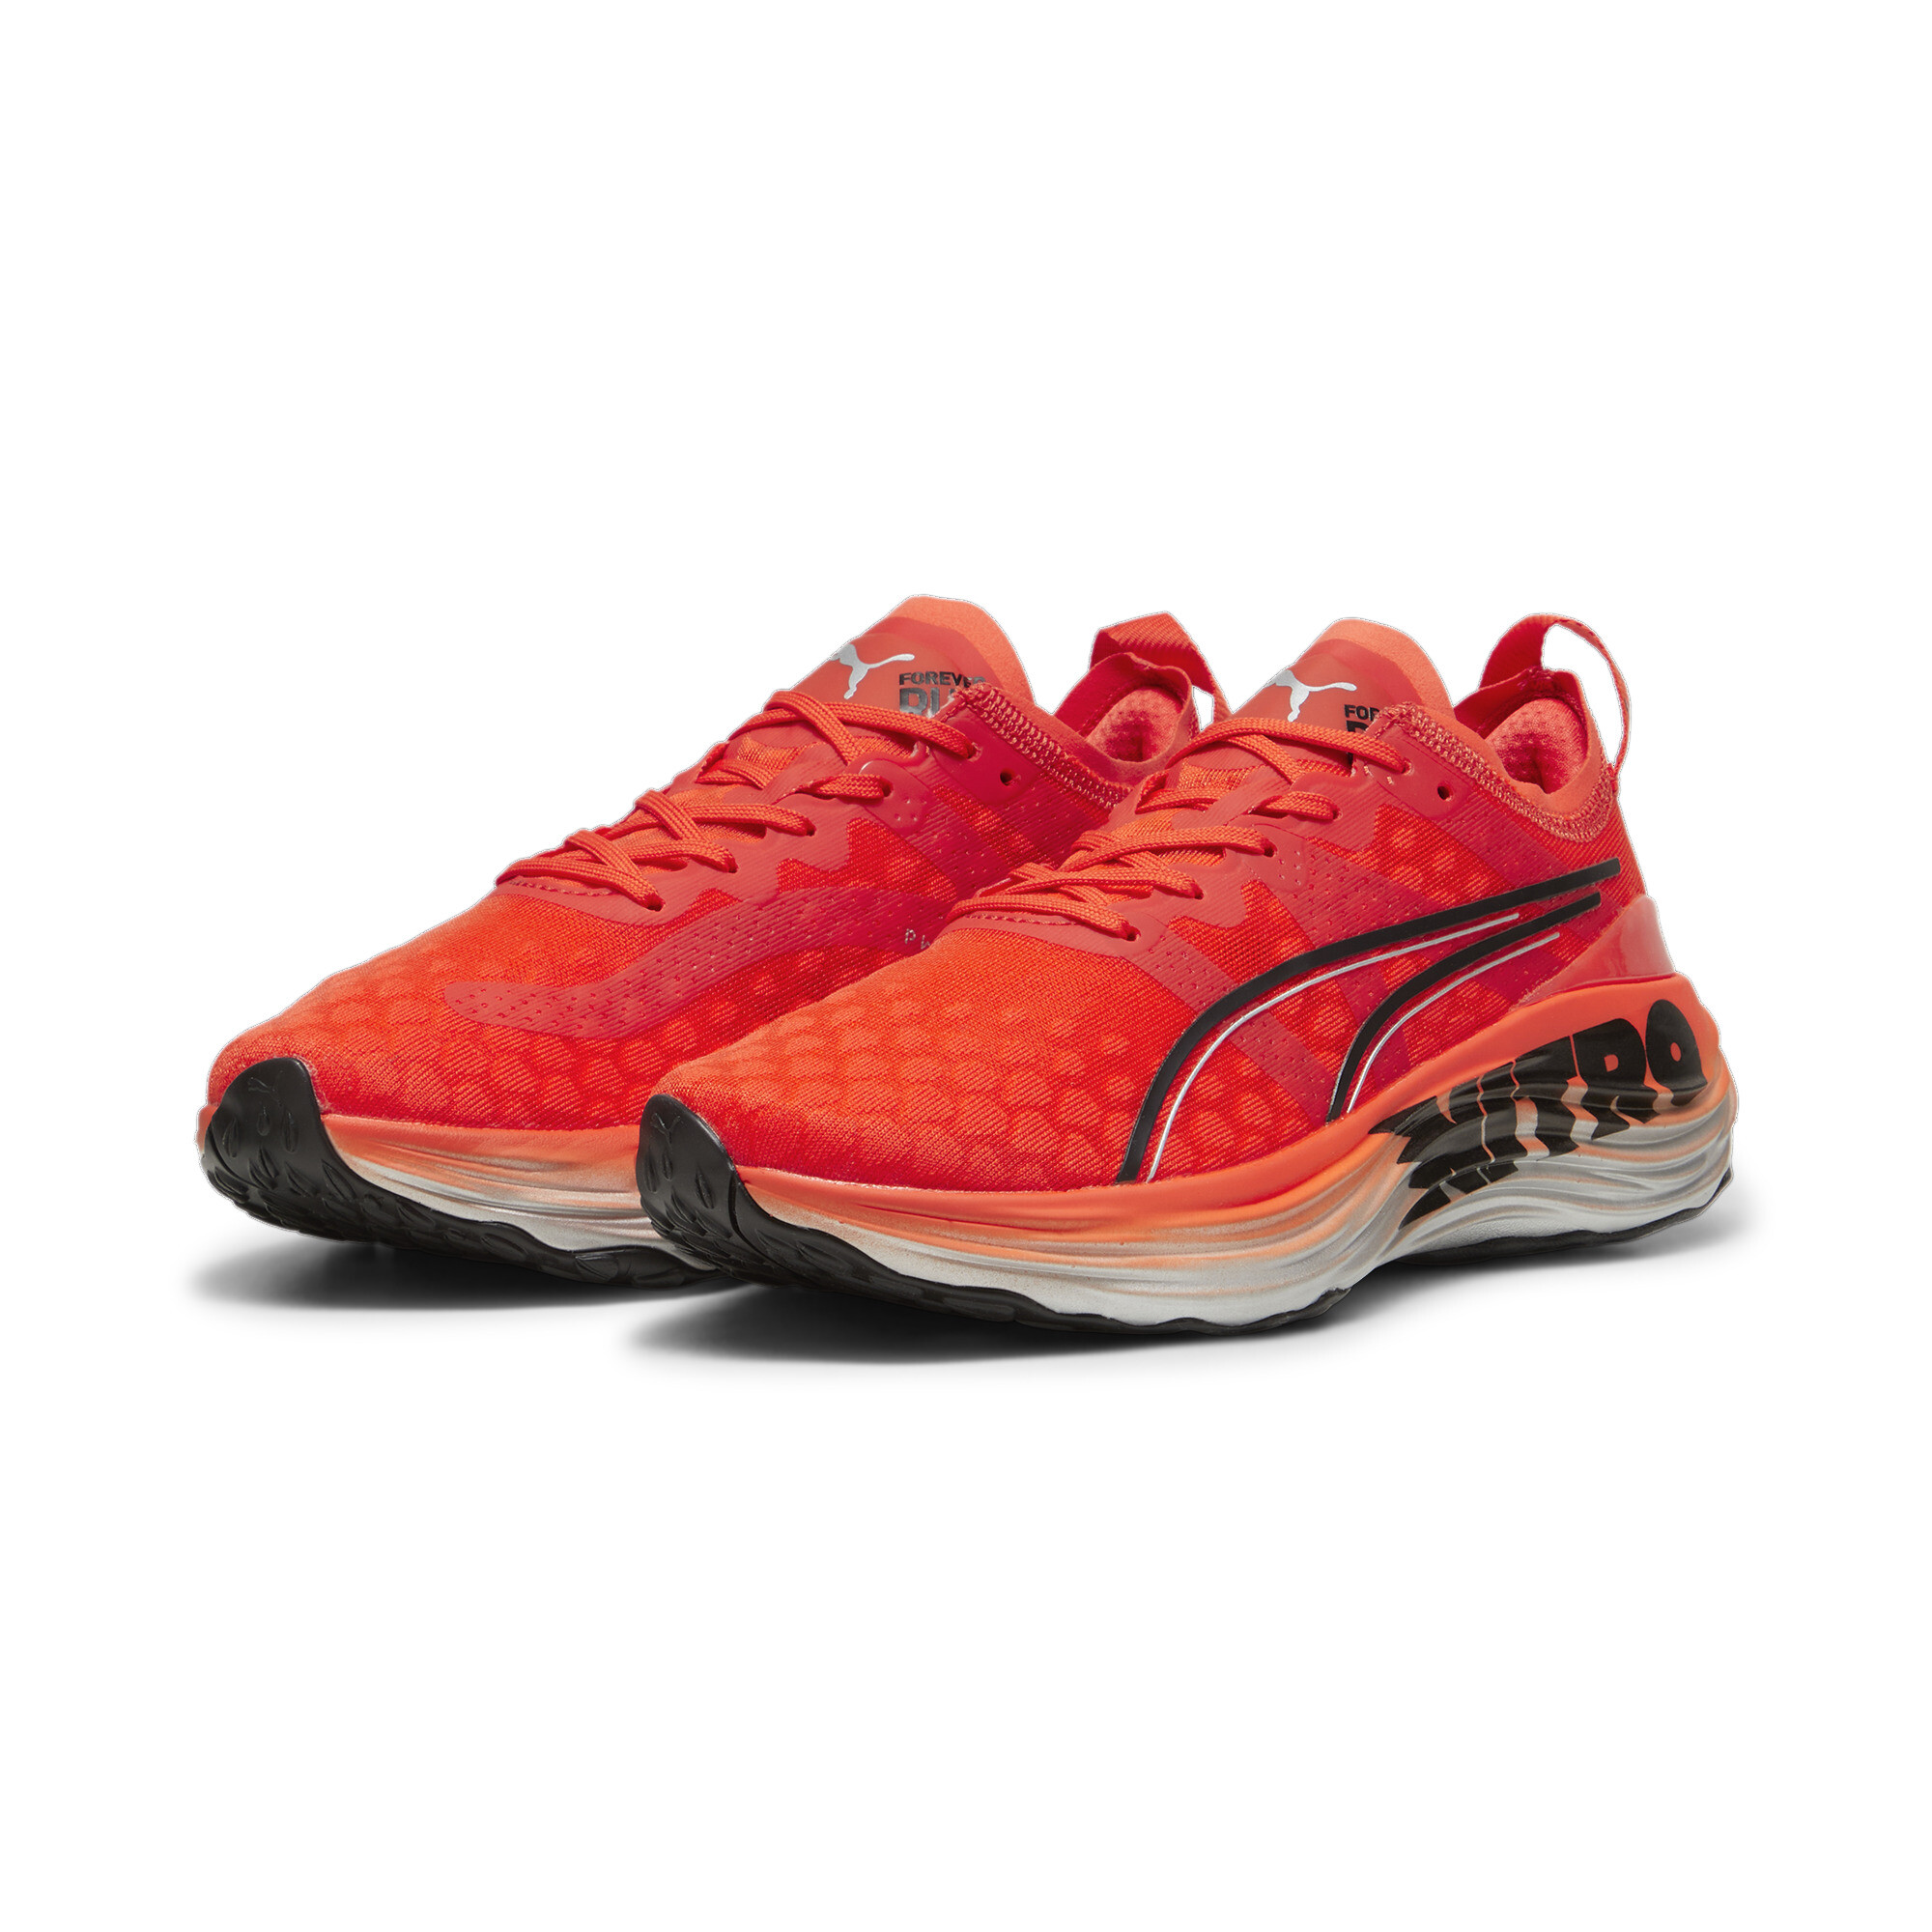 Women's Puma Forever Run NITRO's Running Shoes, Red, Size 37, Shoes